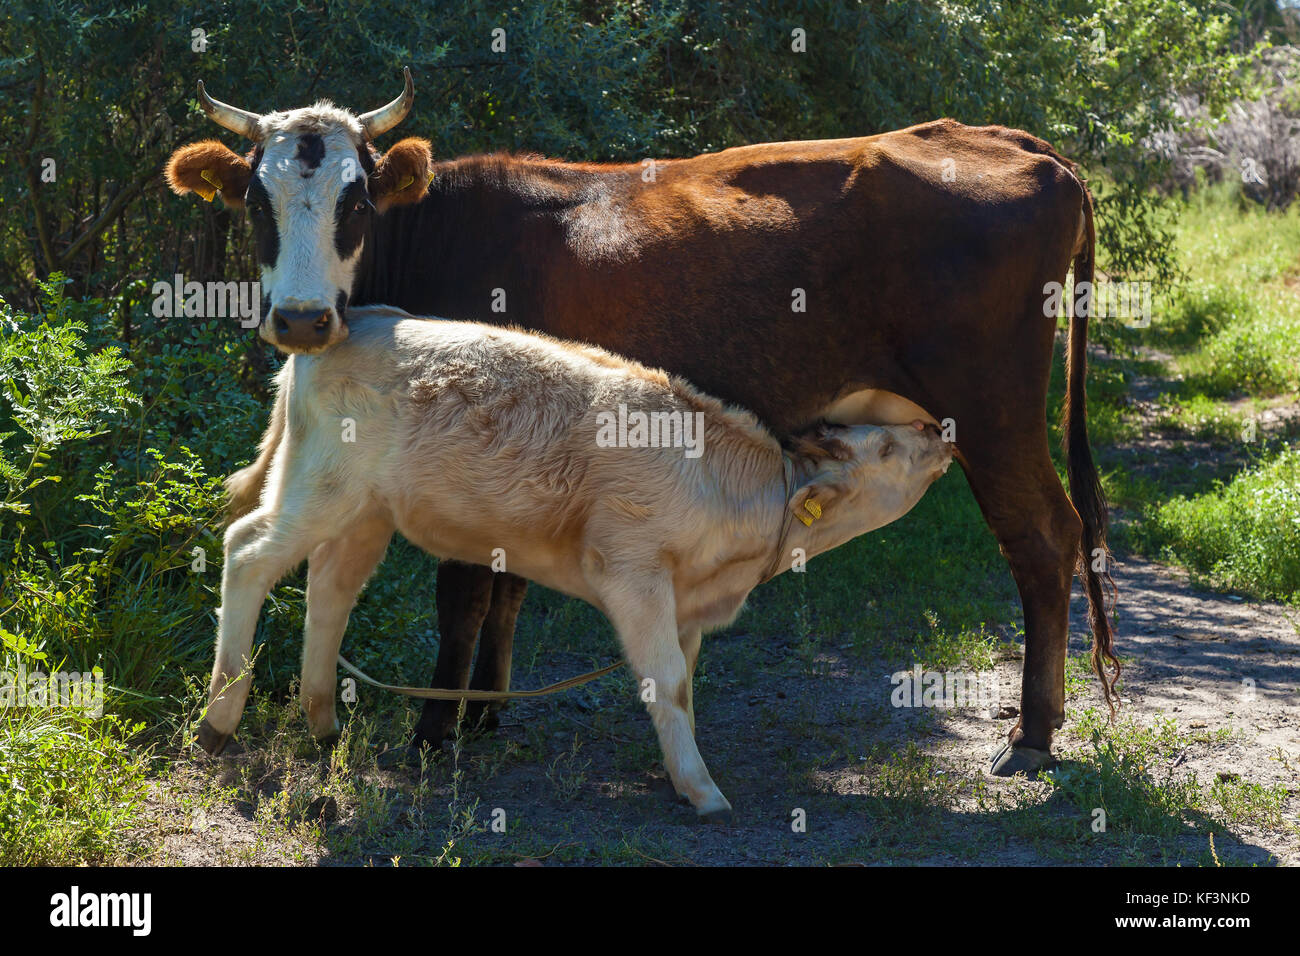 Calf sucks at udder of the cow. Stock Photo